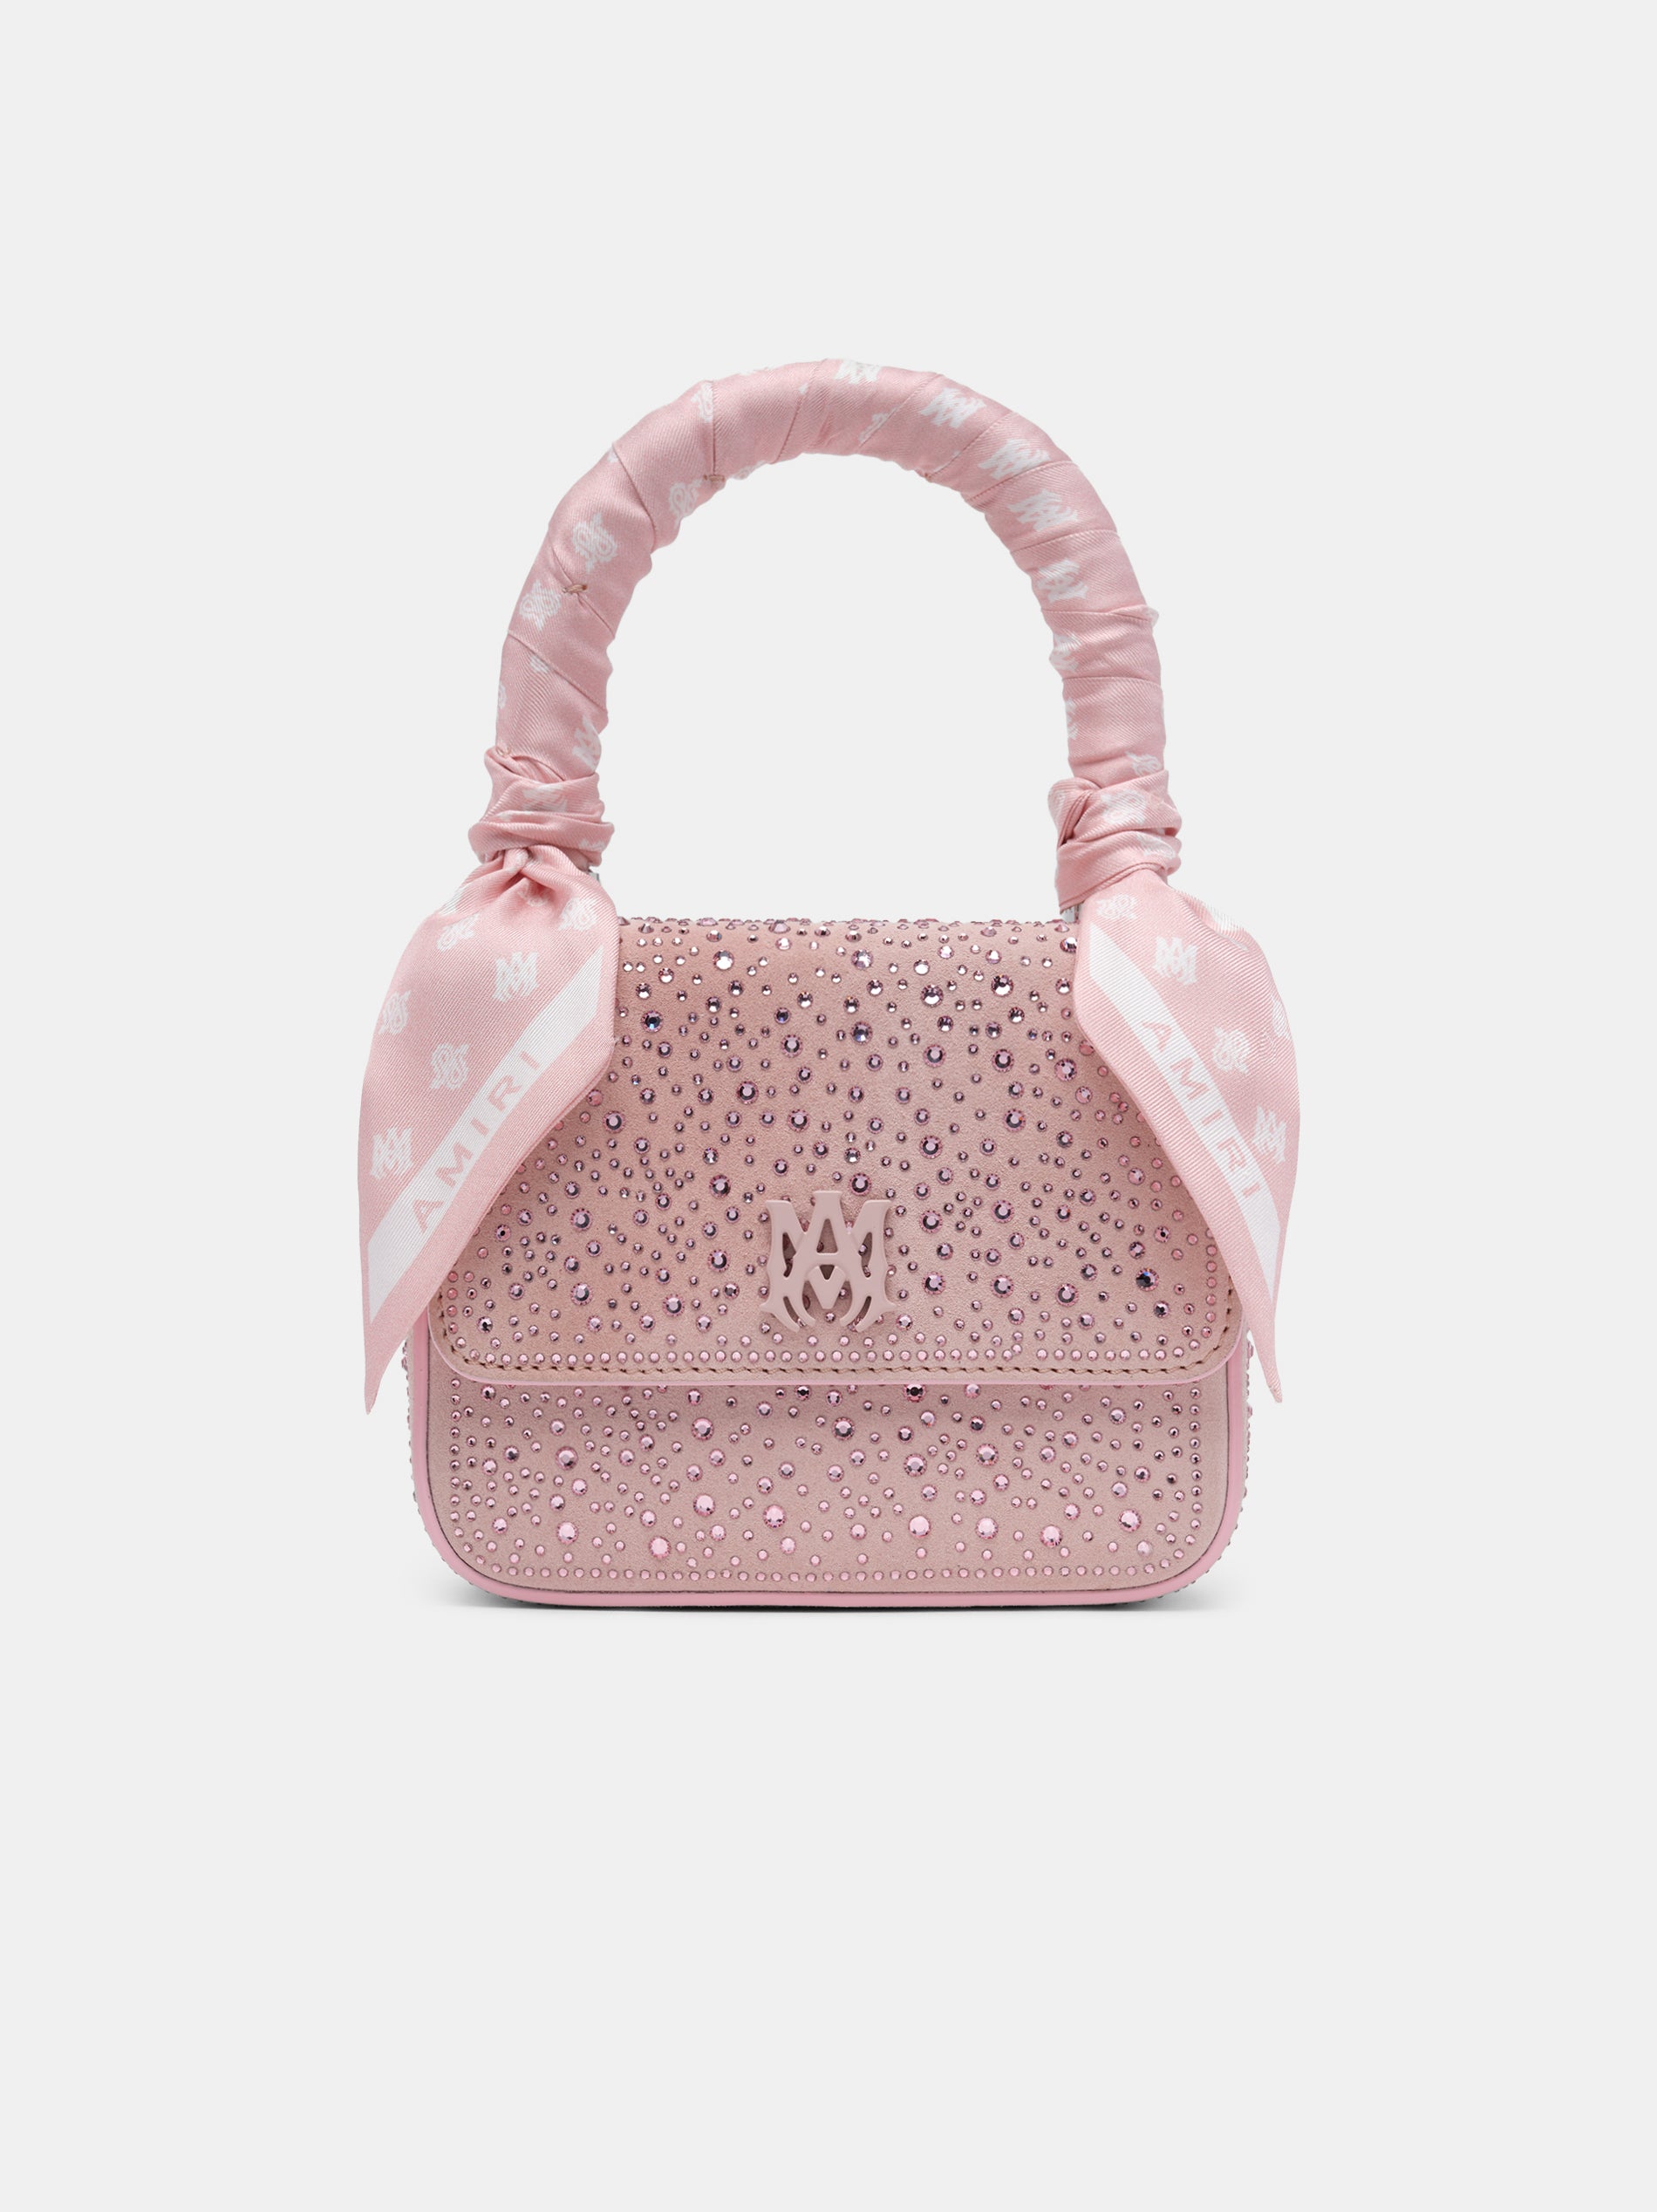 Product WOMEN - CRYSTAL MICRO MA BAG - Pink featured image